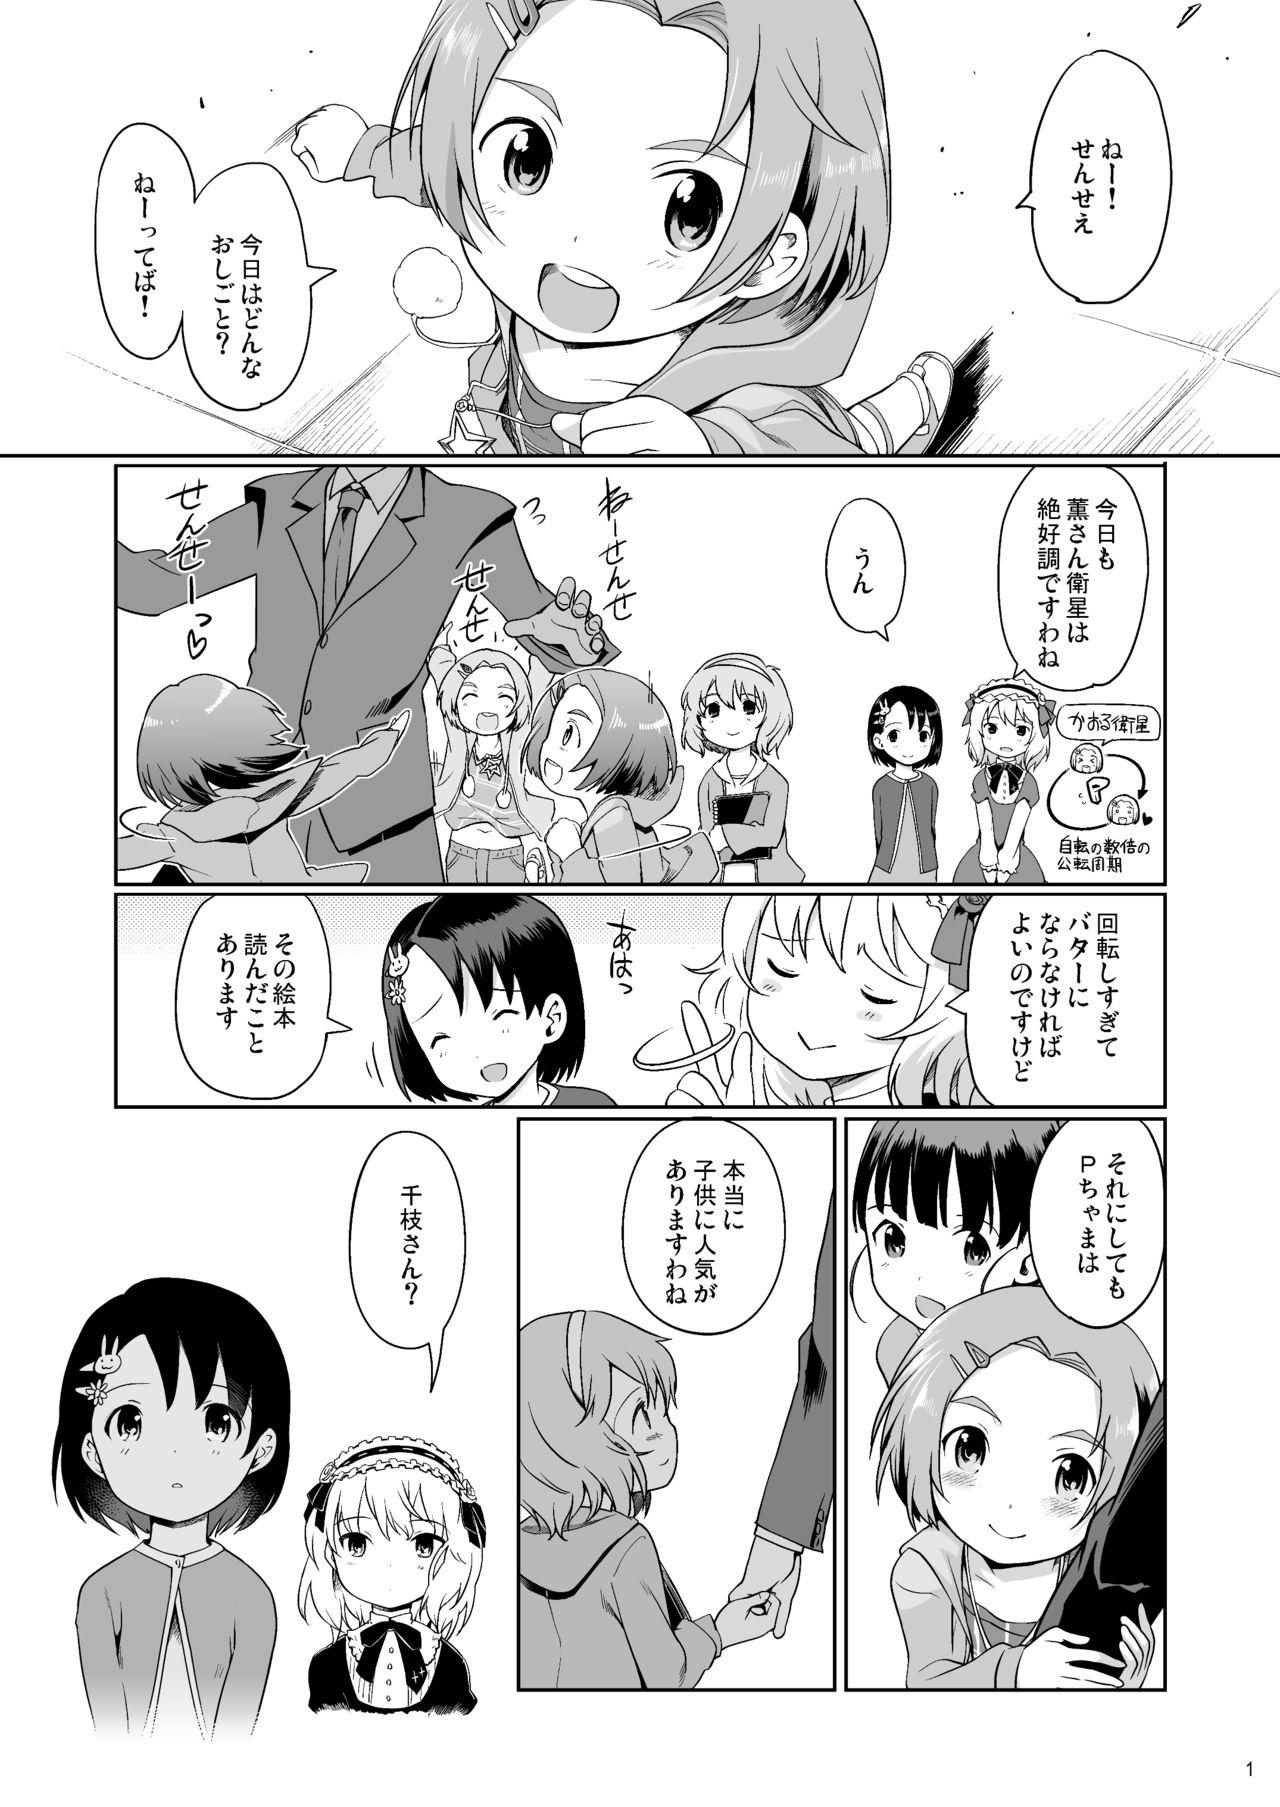 Ballbusting P-san to Issho! 2 - The idolmaster Amateur - Page 2